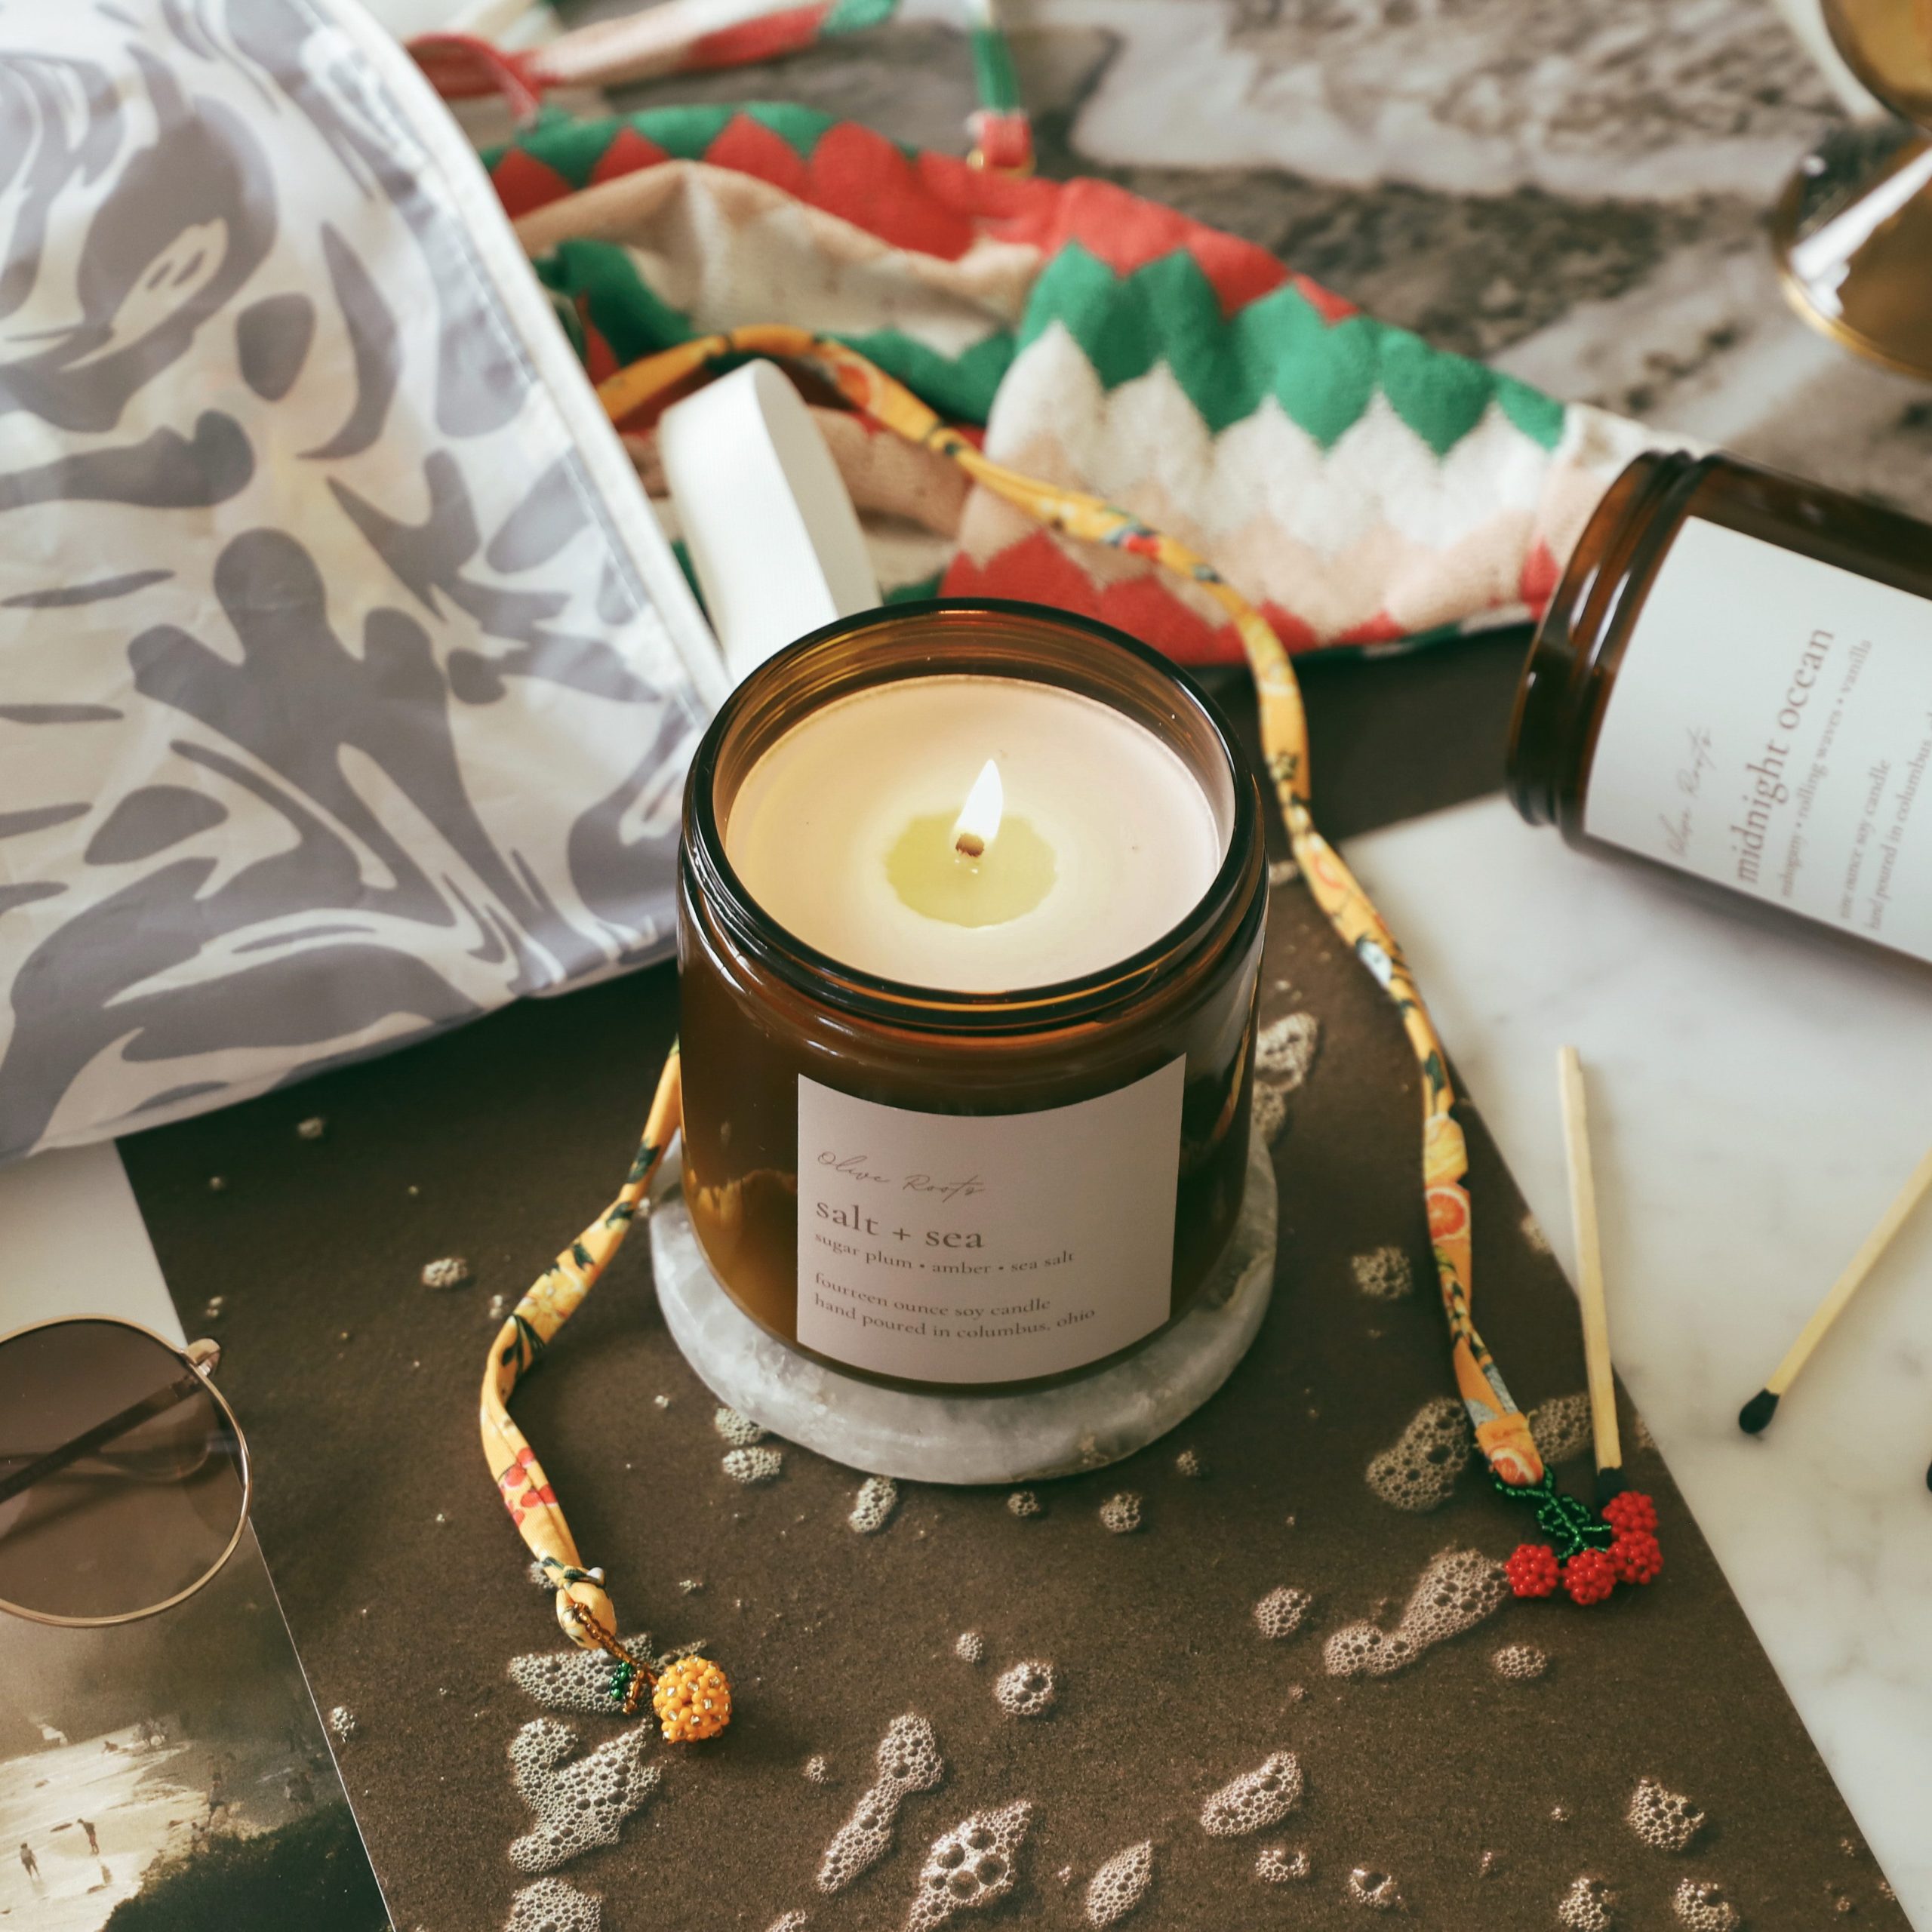 Candles For You Based On Your Taylor Swift Era - Vellabox